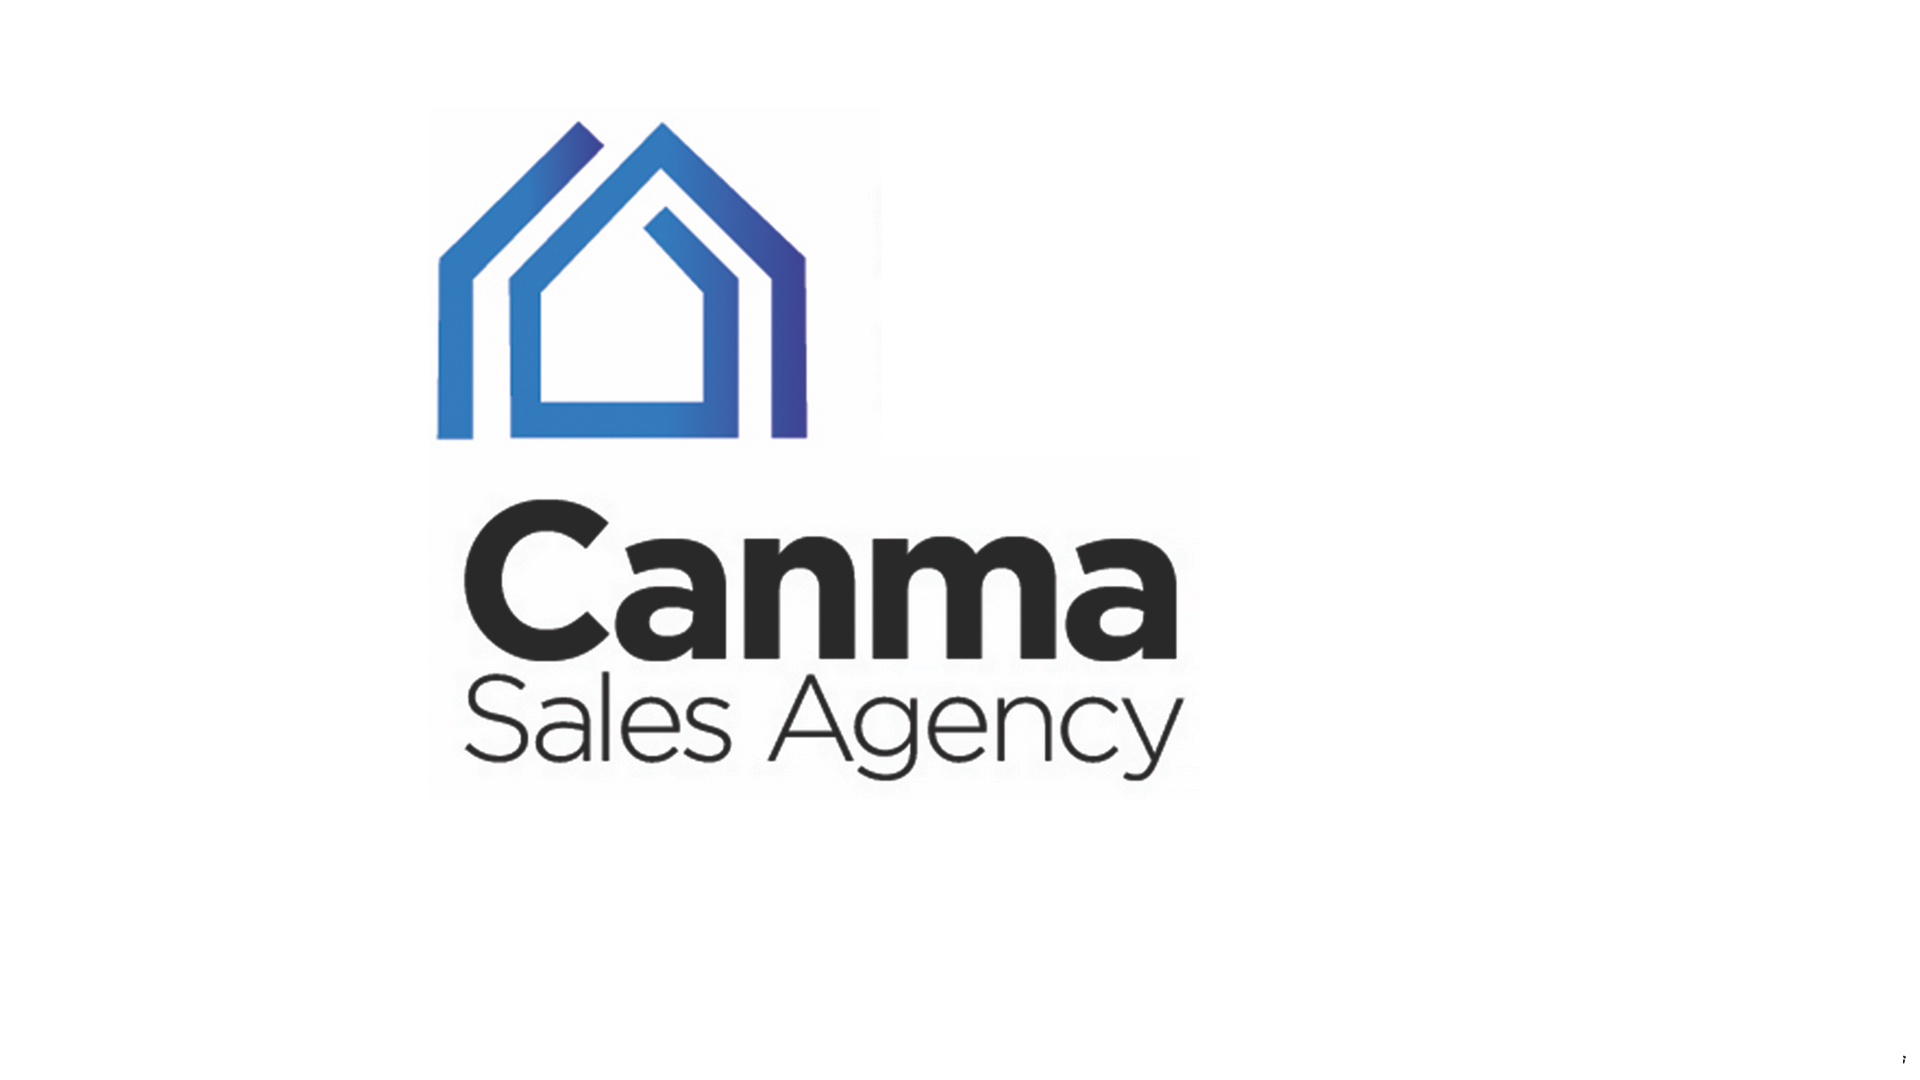 CANMA SALES AGENCY